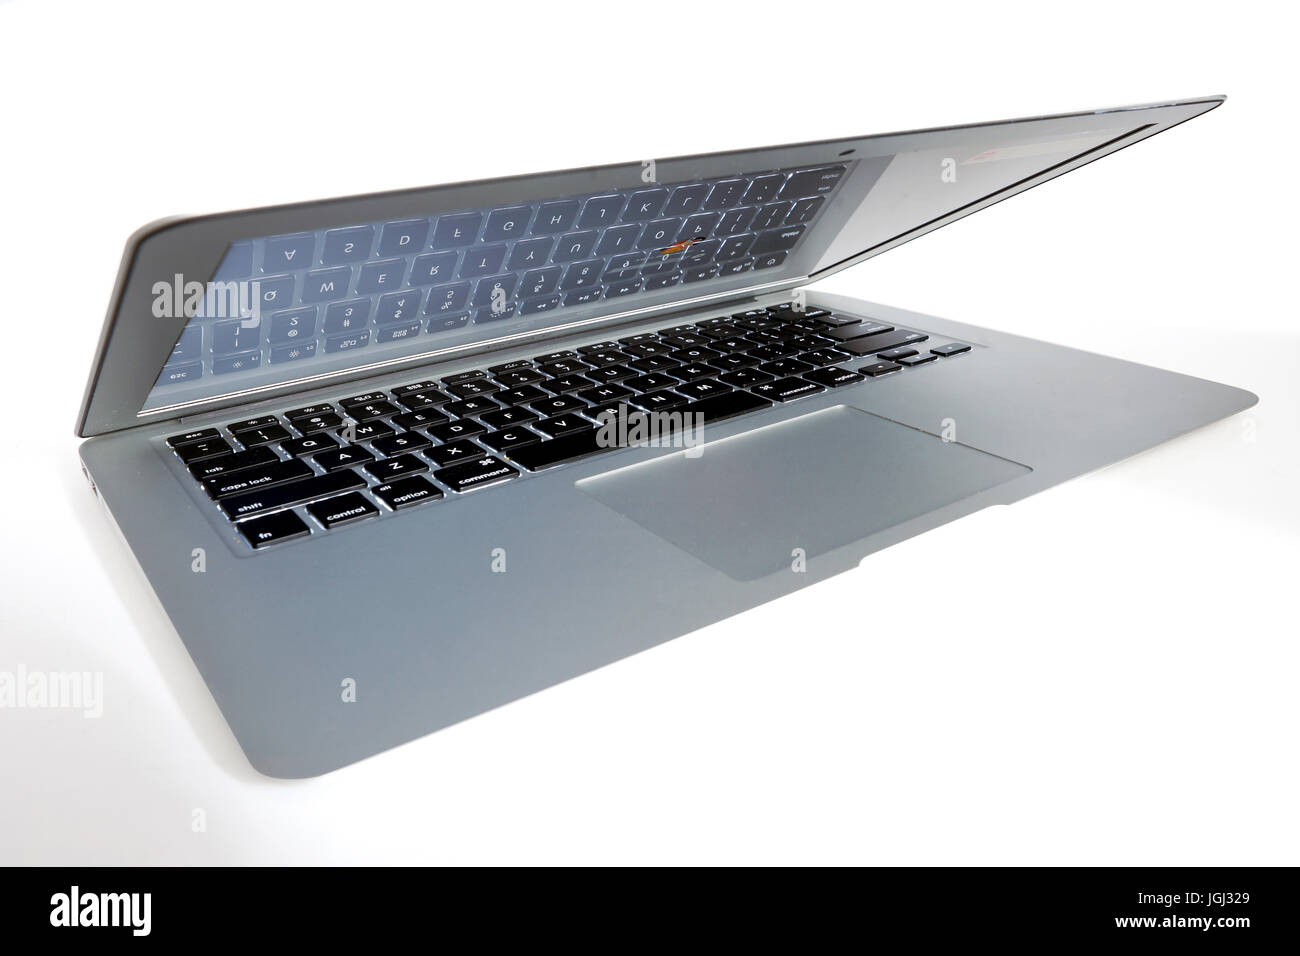 Montreal, Canada, 7 July, 2017. Image of a Macbook Air on white background.Credit:Mario Beauregard/Alamy Live News Stock Photo